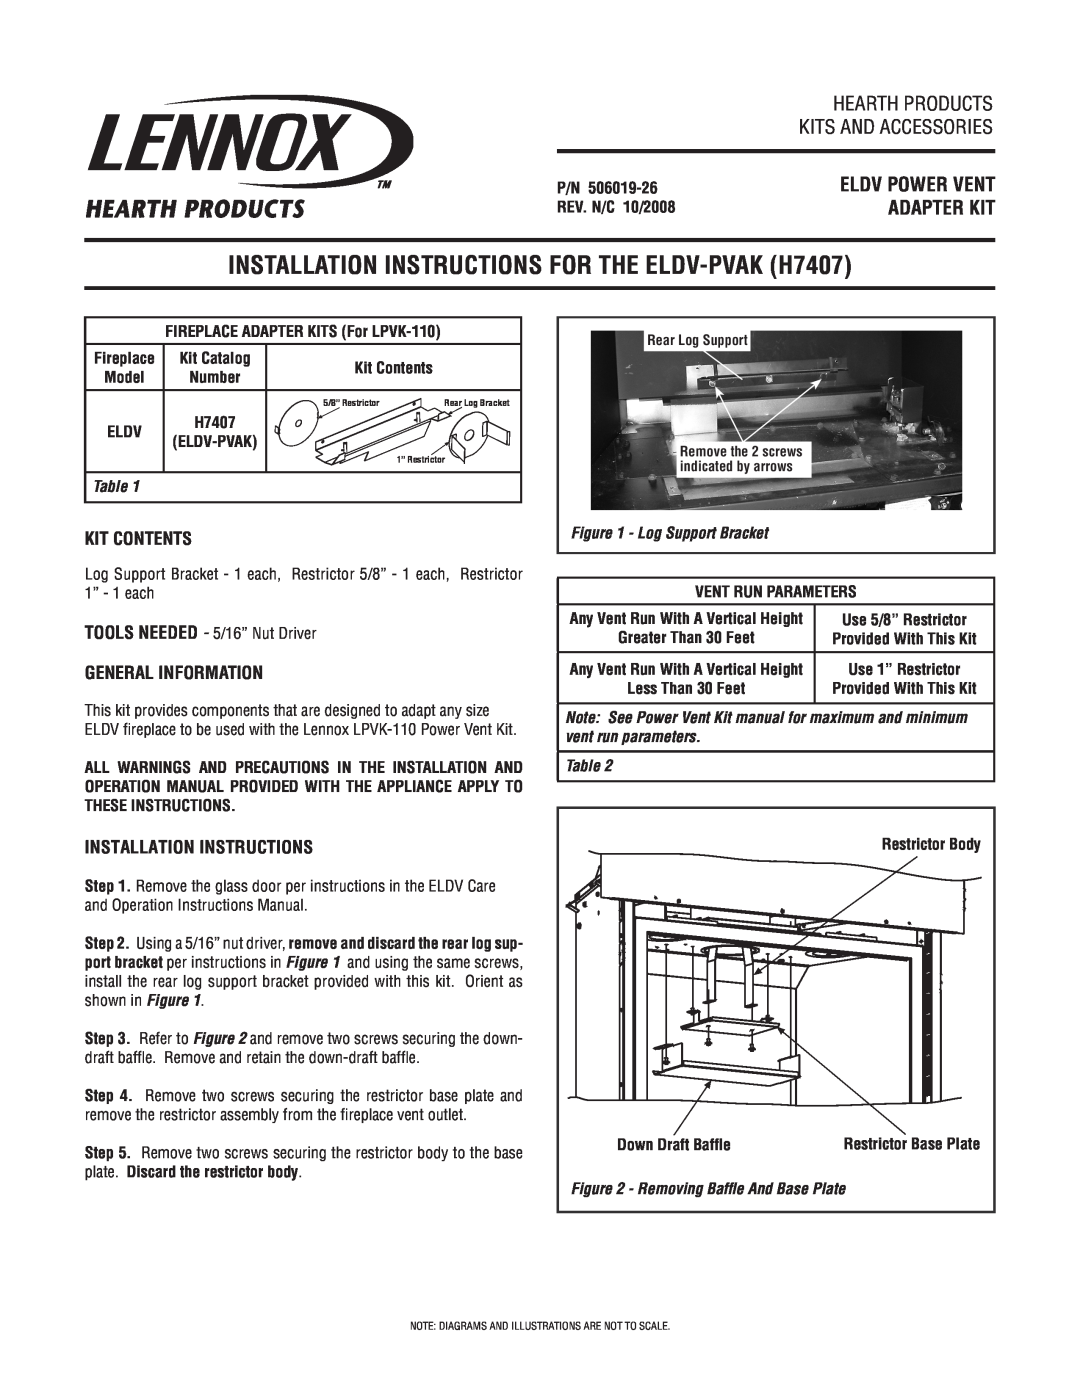 Lennox Hearth LPVK-110 installation instructions Log Support Bracket, Removing Baffle And Base Plate, Kit Contents 